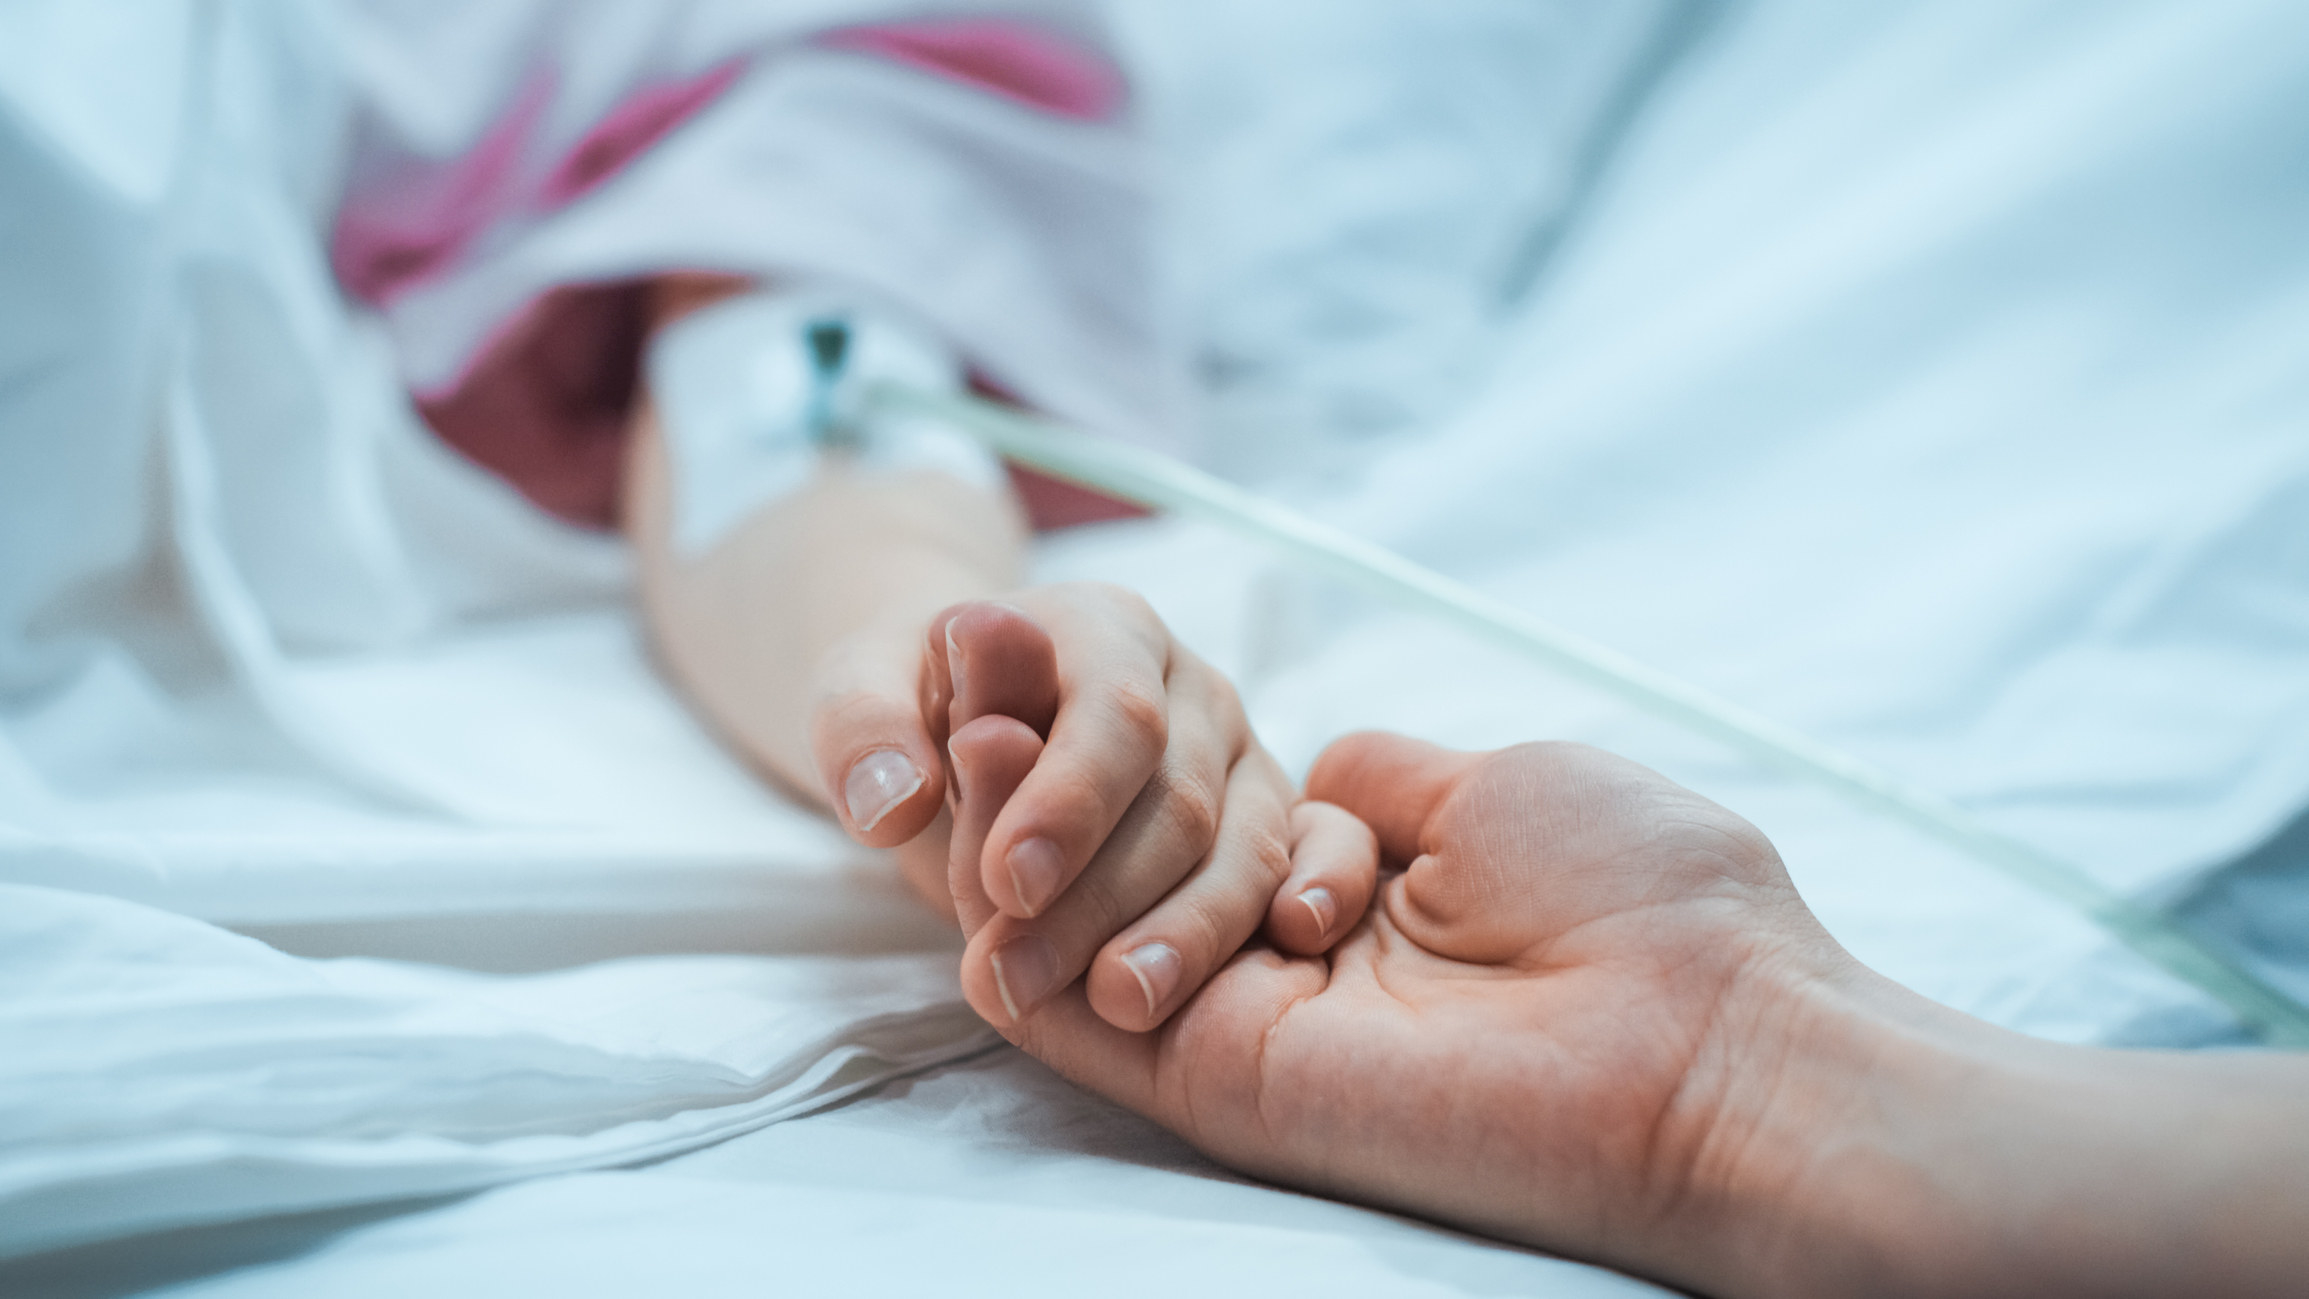 A child in a hospital bed holding hands with a grownup